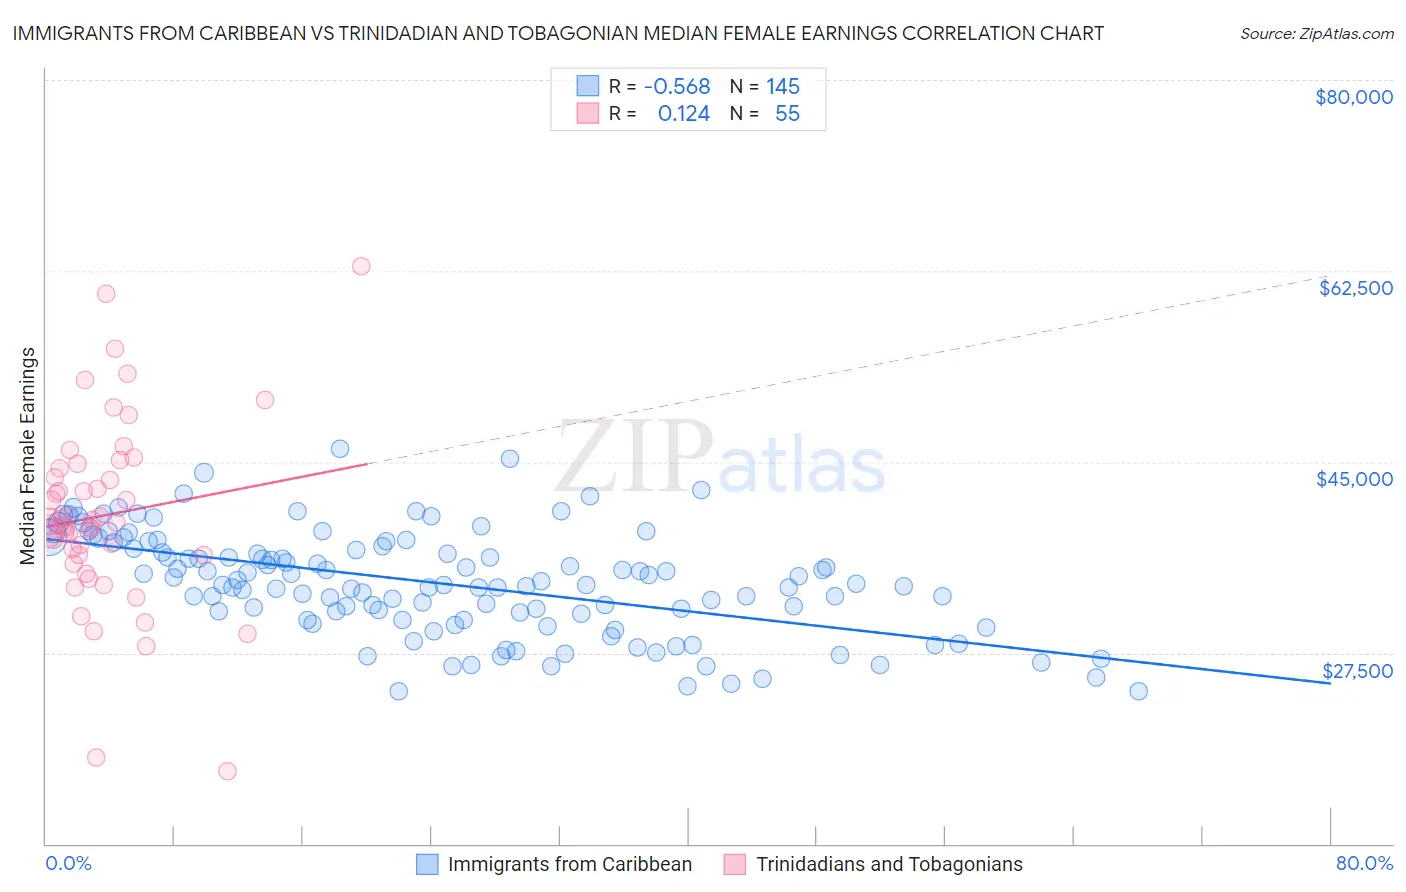 Immigrants from Caribbean vs Trinidadian and Tobagonian Median Female Earnings